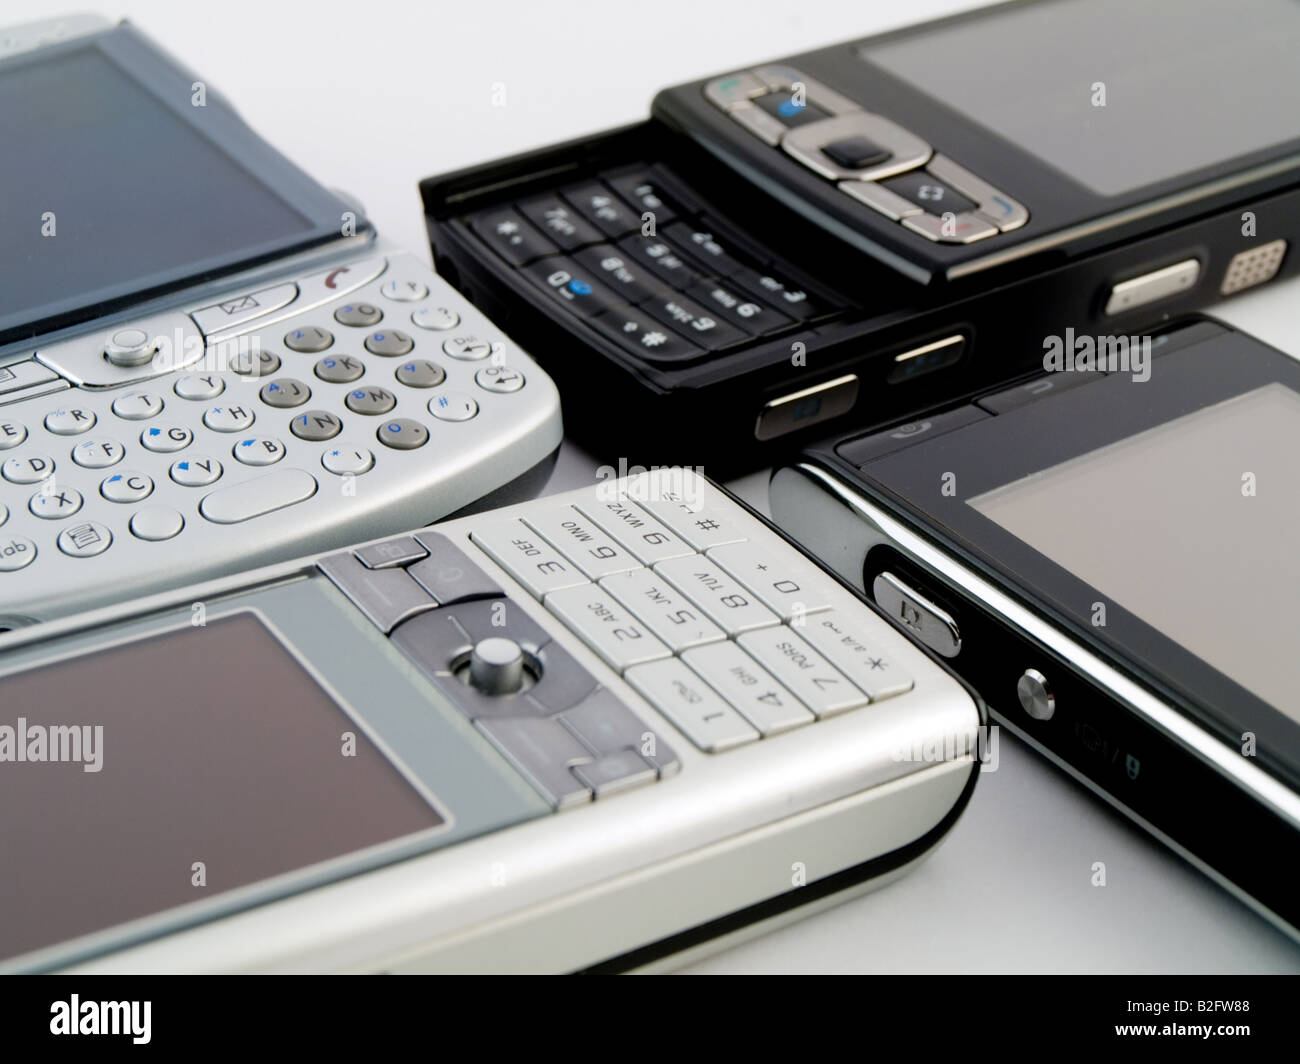 Stack Pile of Several Modern Mobile Phones PDA Cell Handheld Units Isolated on White Background Stock Photo